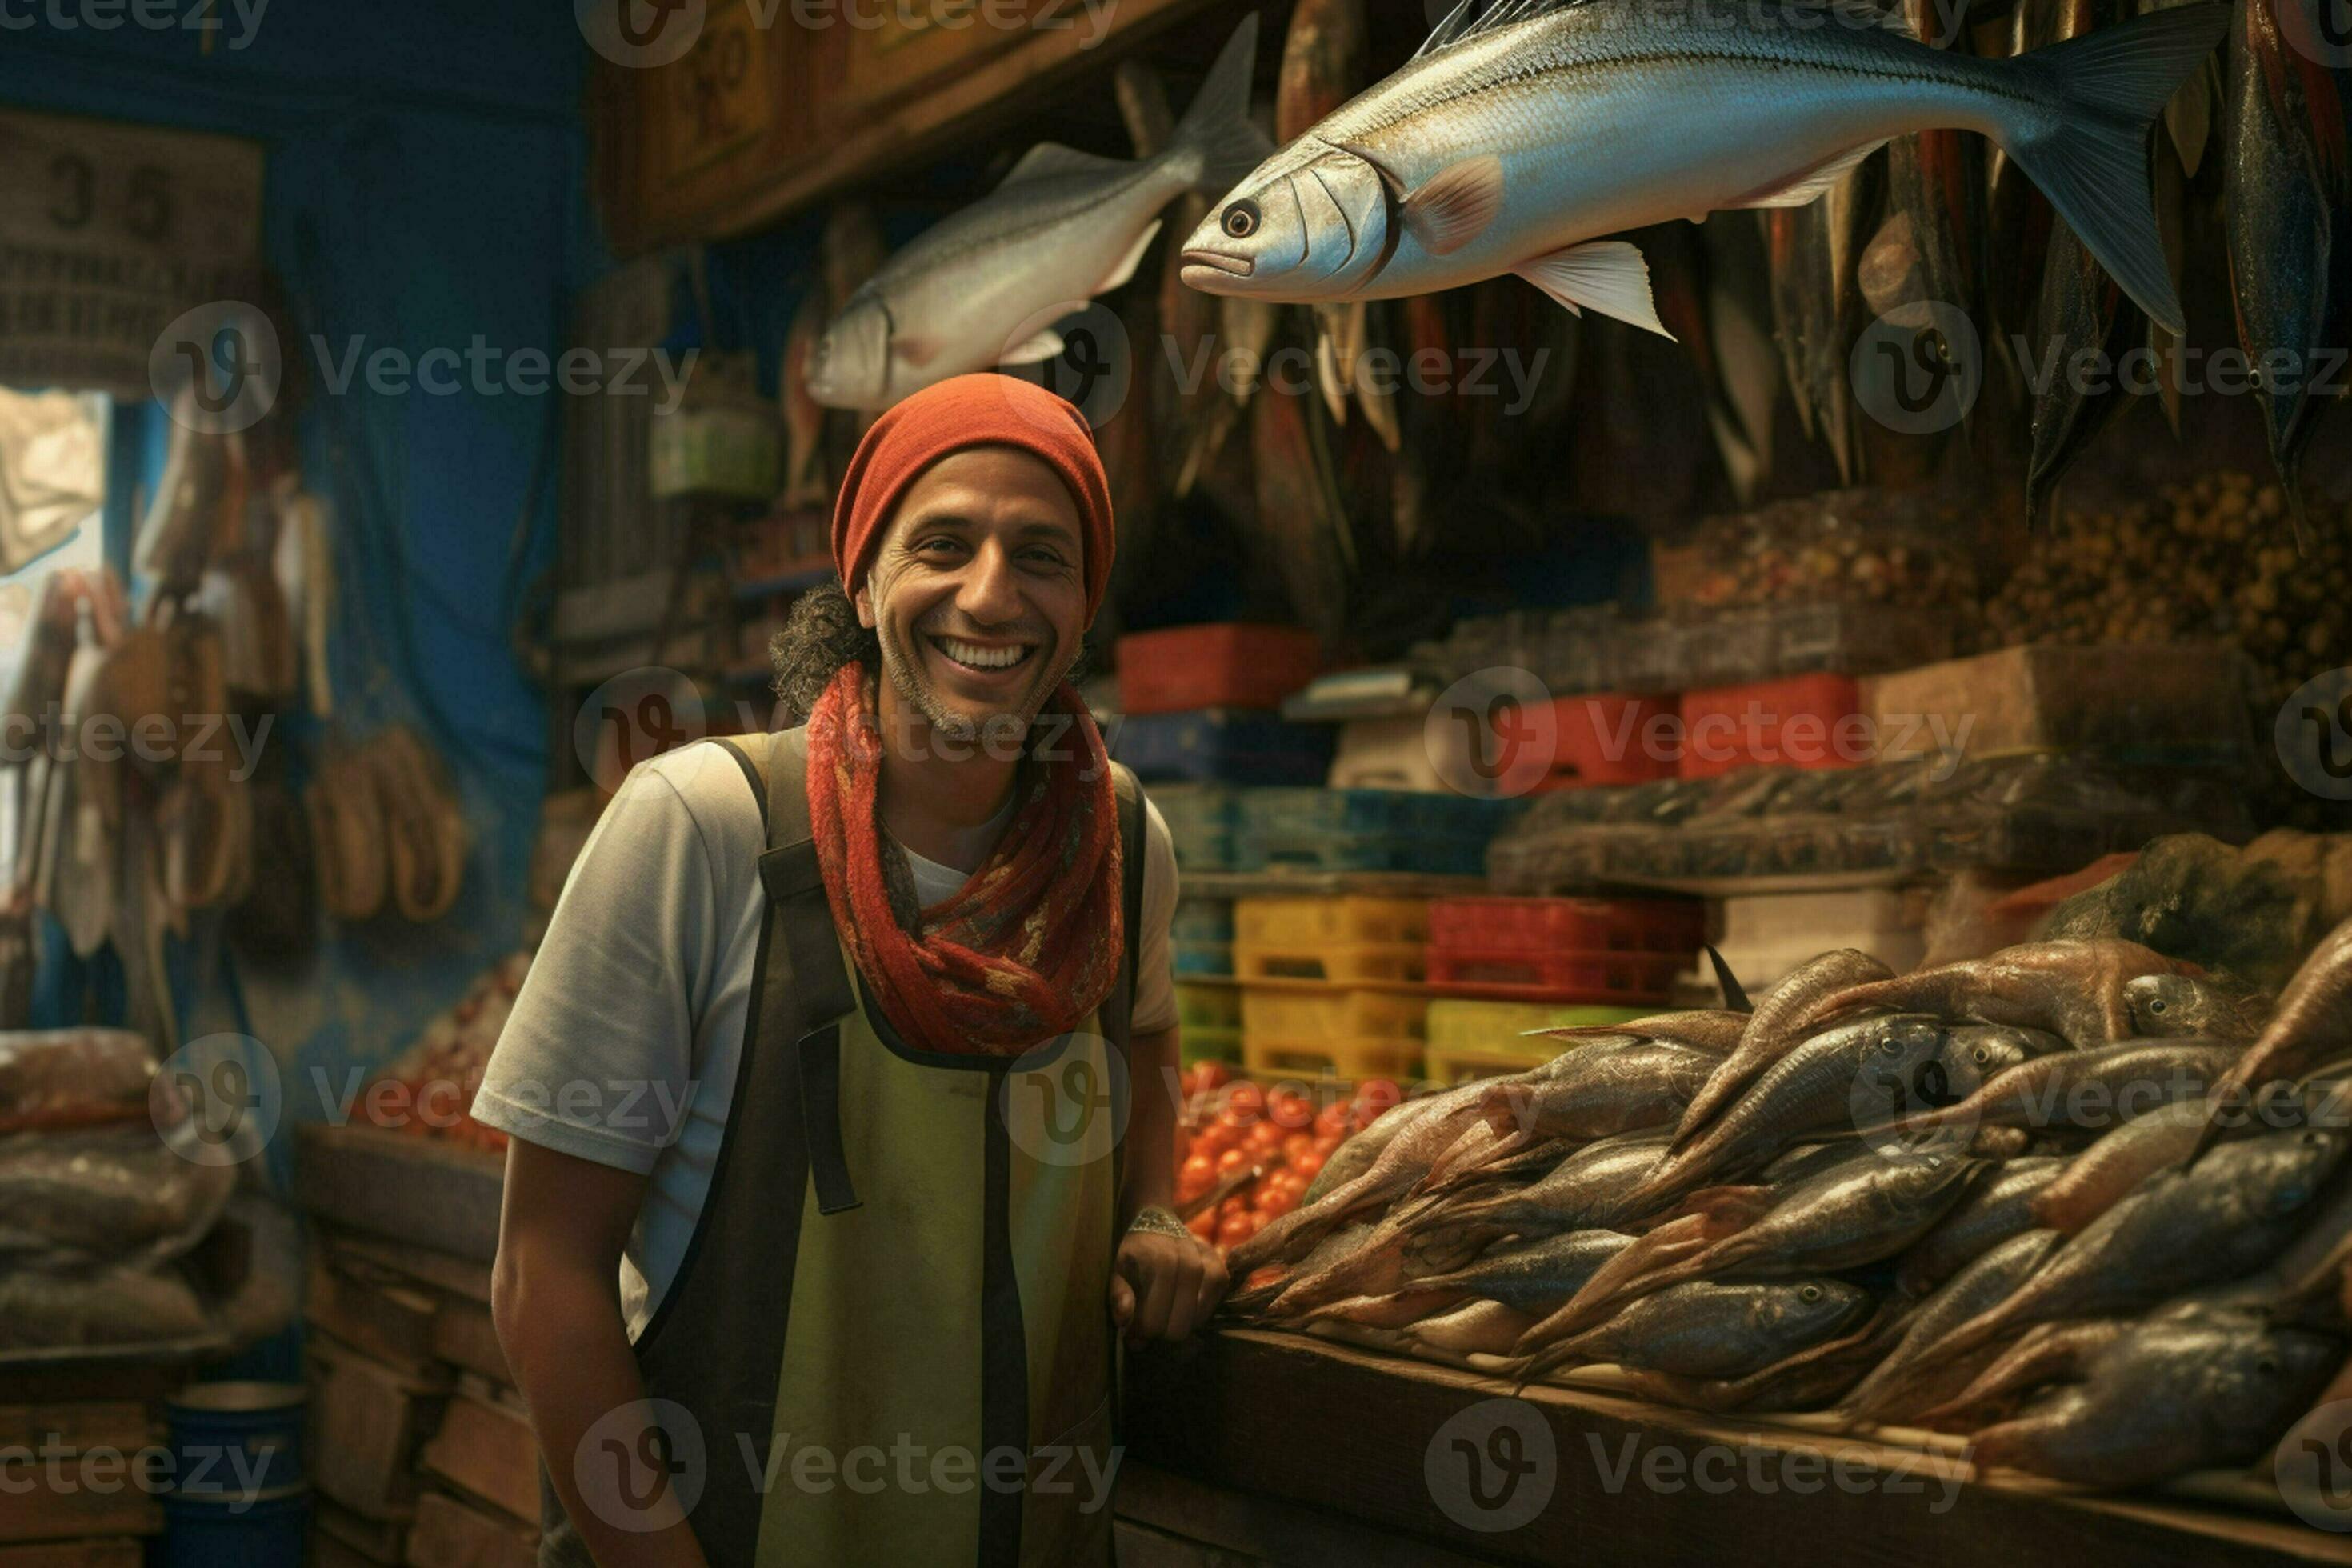 Portrait of a smiling middle-aged man selling fresh fish in a fish